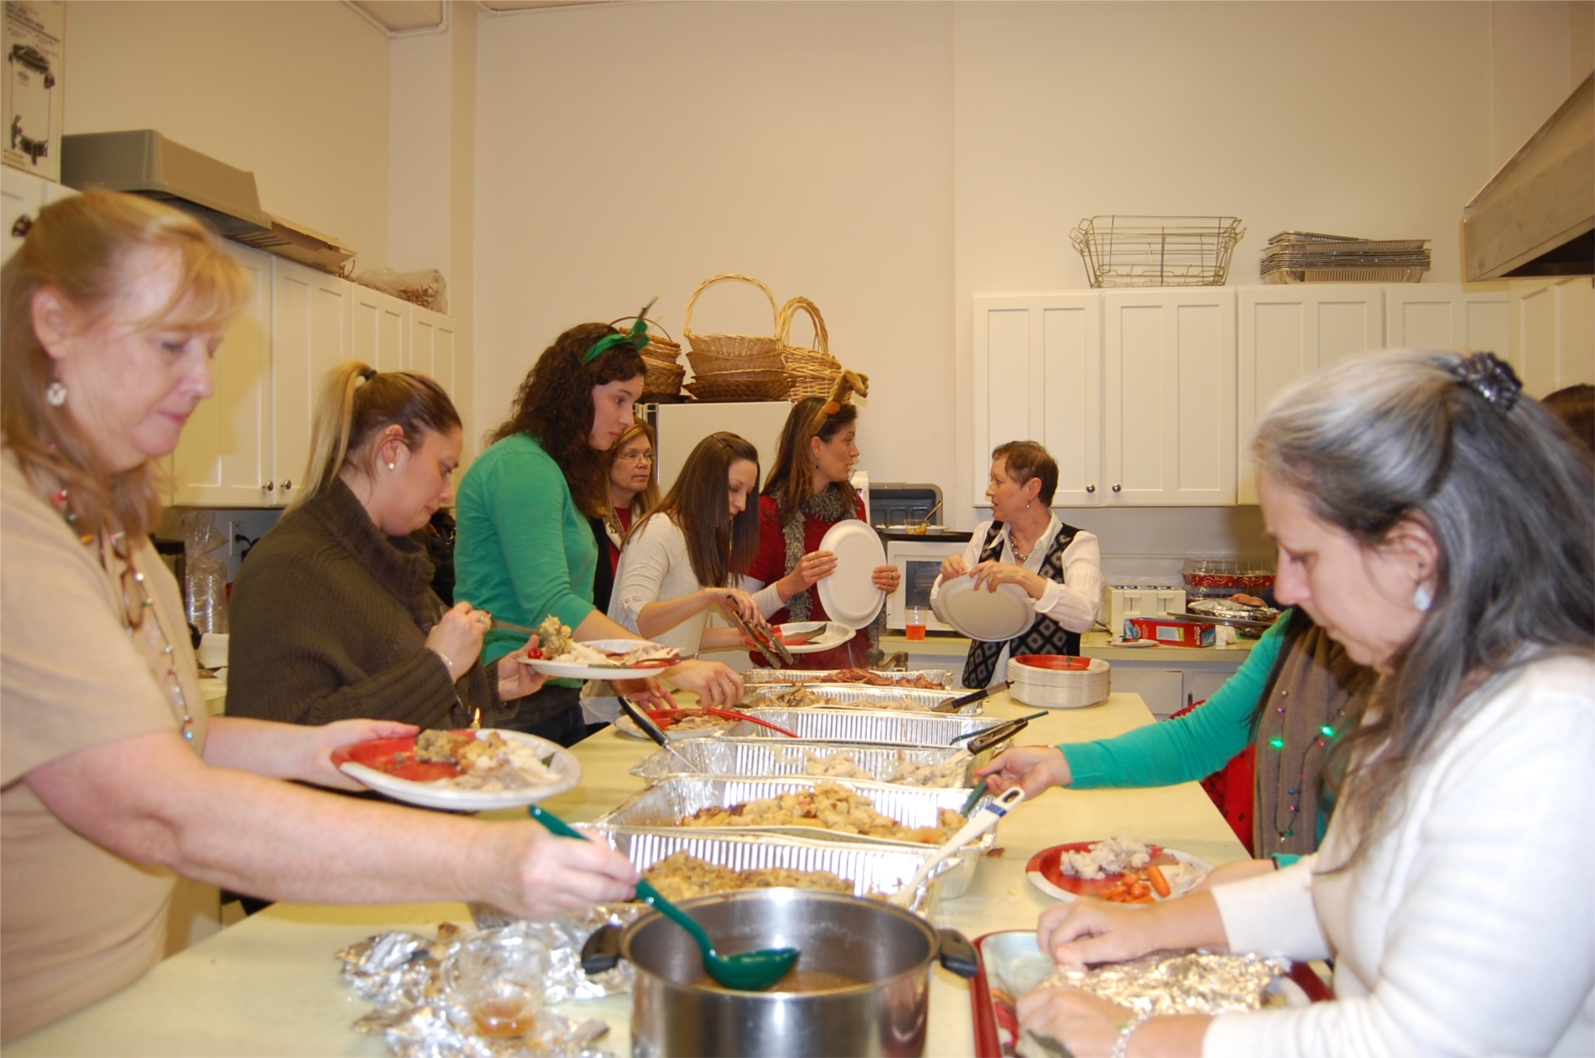 Each year ReMed staff prepare a holiday feast for our clients.  It's an evening of friendship, food, celebration and fun for all.